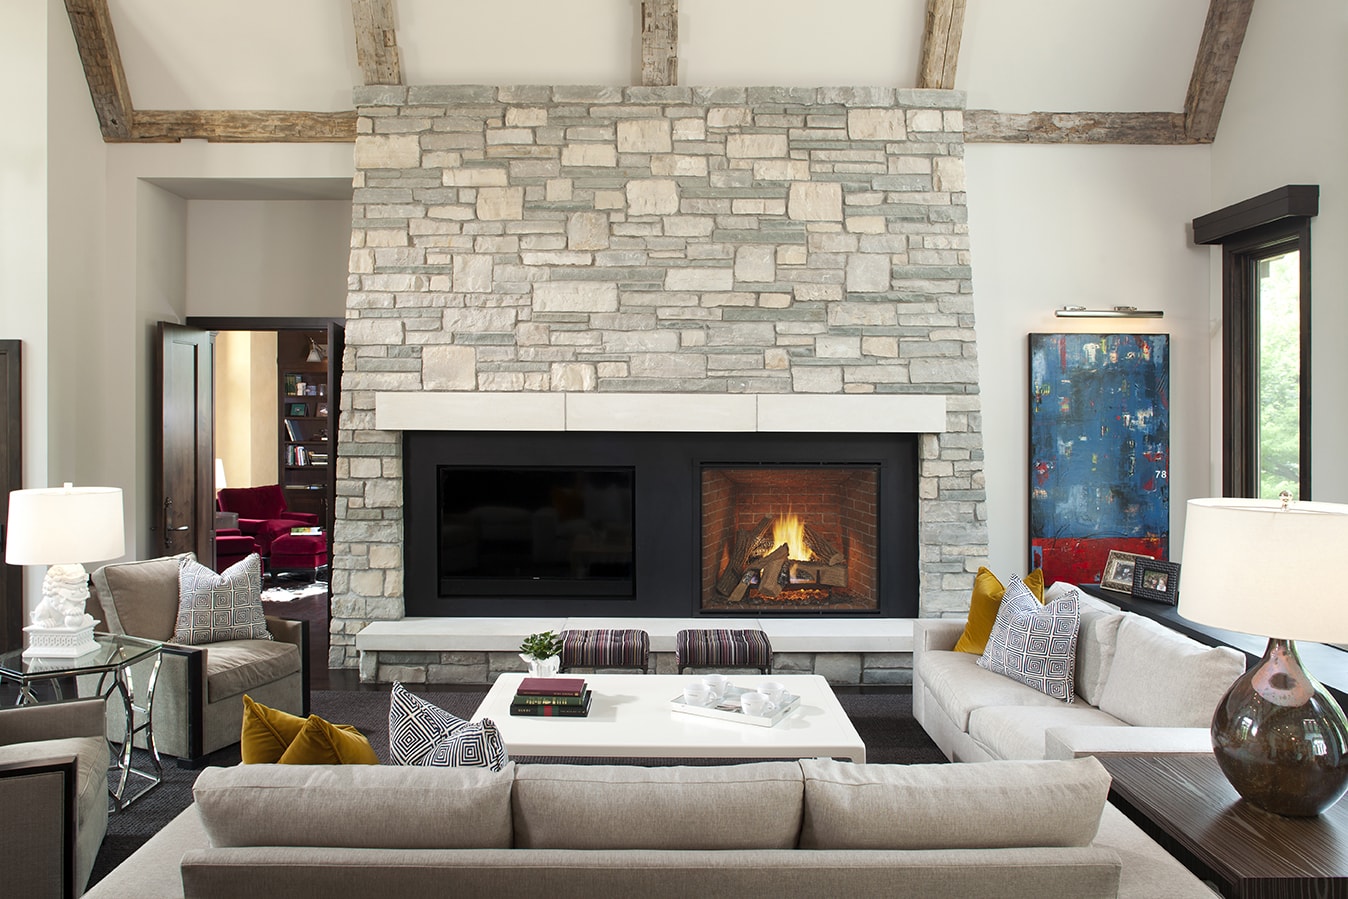 How to Turn On Gas Fireplace with Wall Key Best Of Unique Fireplace Idea Gallery